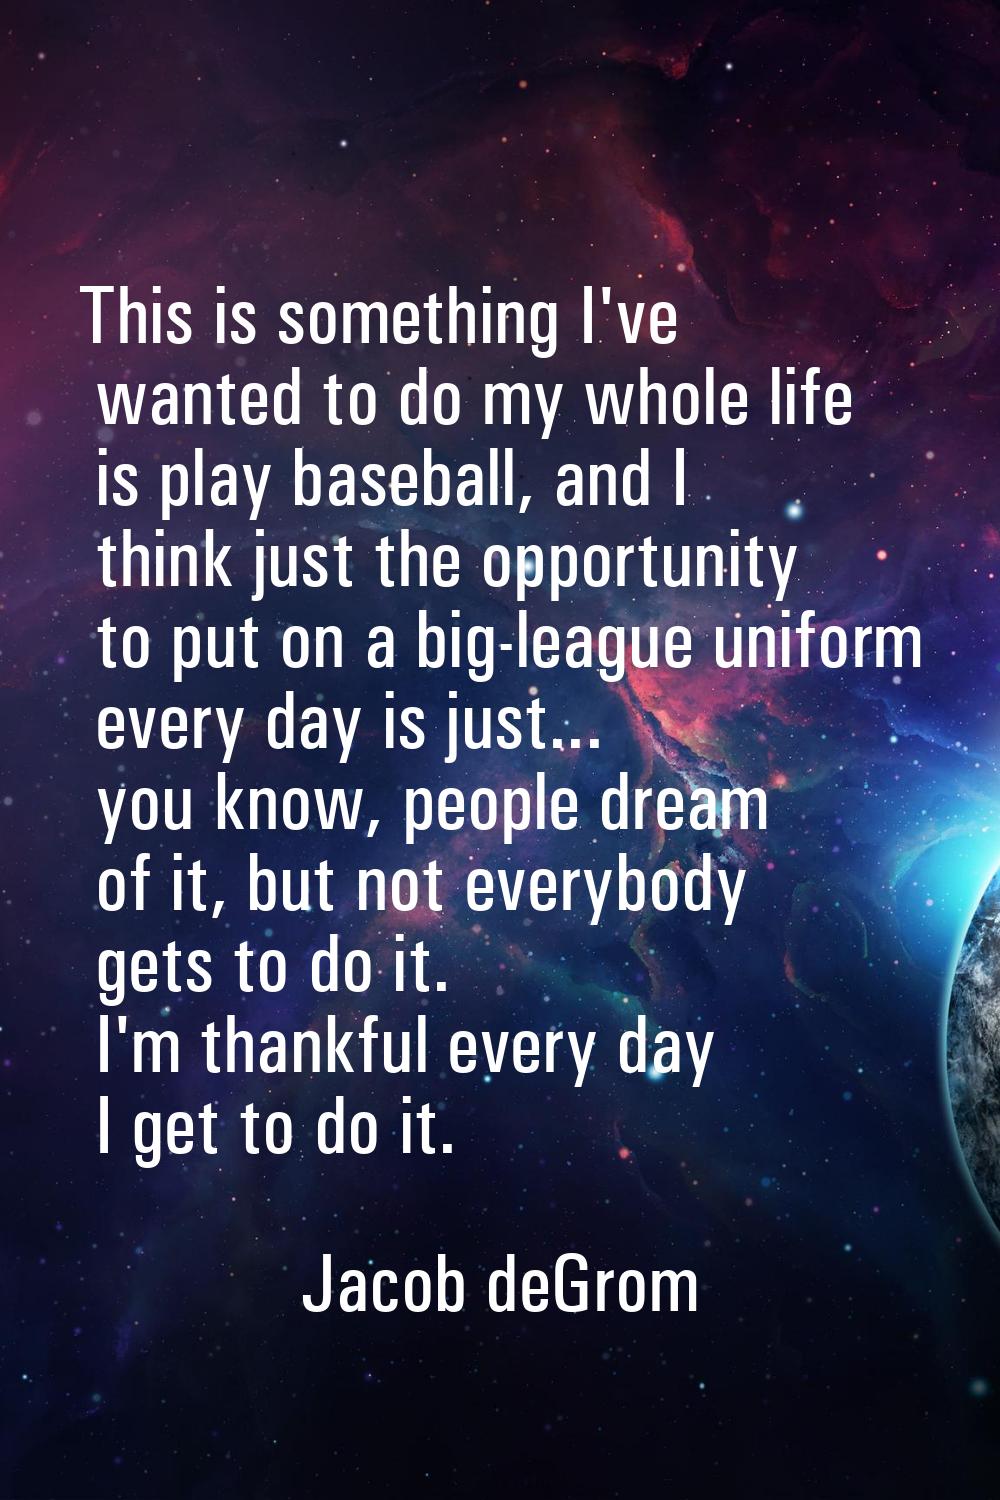 This is something I've wanted to do my whole life is play baseball, and I think just the opportunit